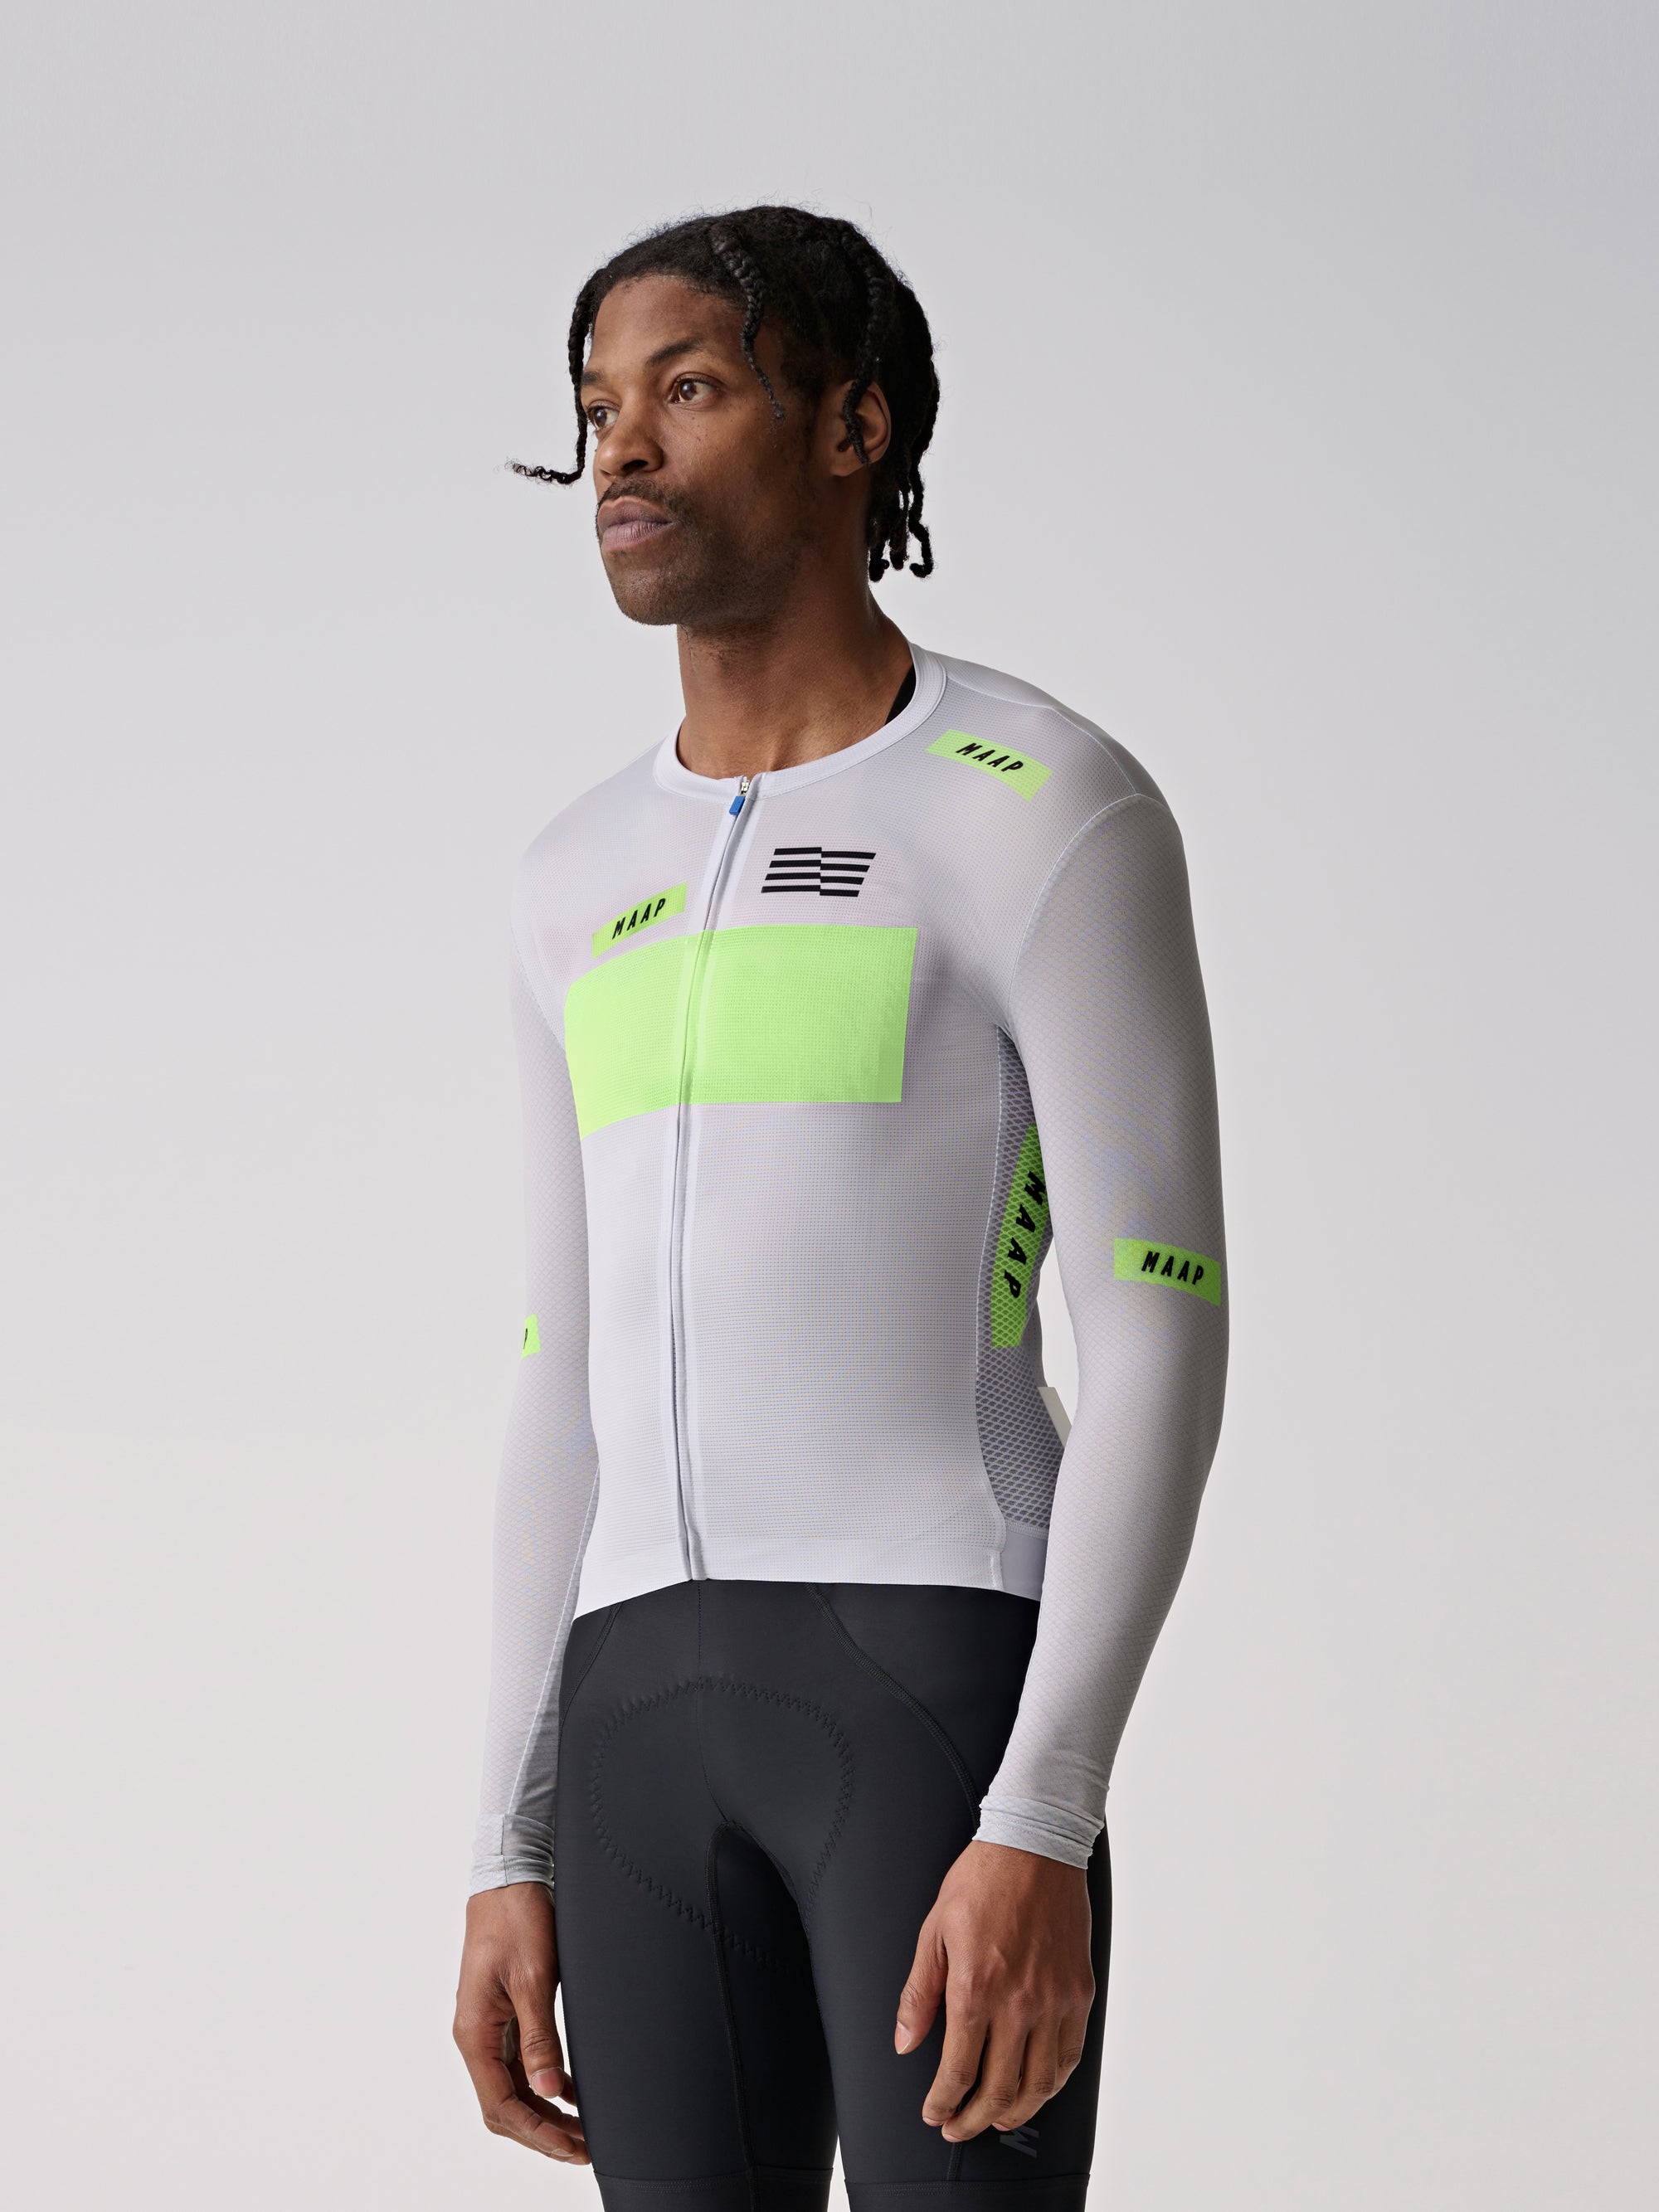 System Pro Air LS Jersey - MAAP Cycling Apparel